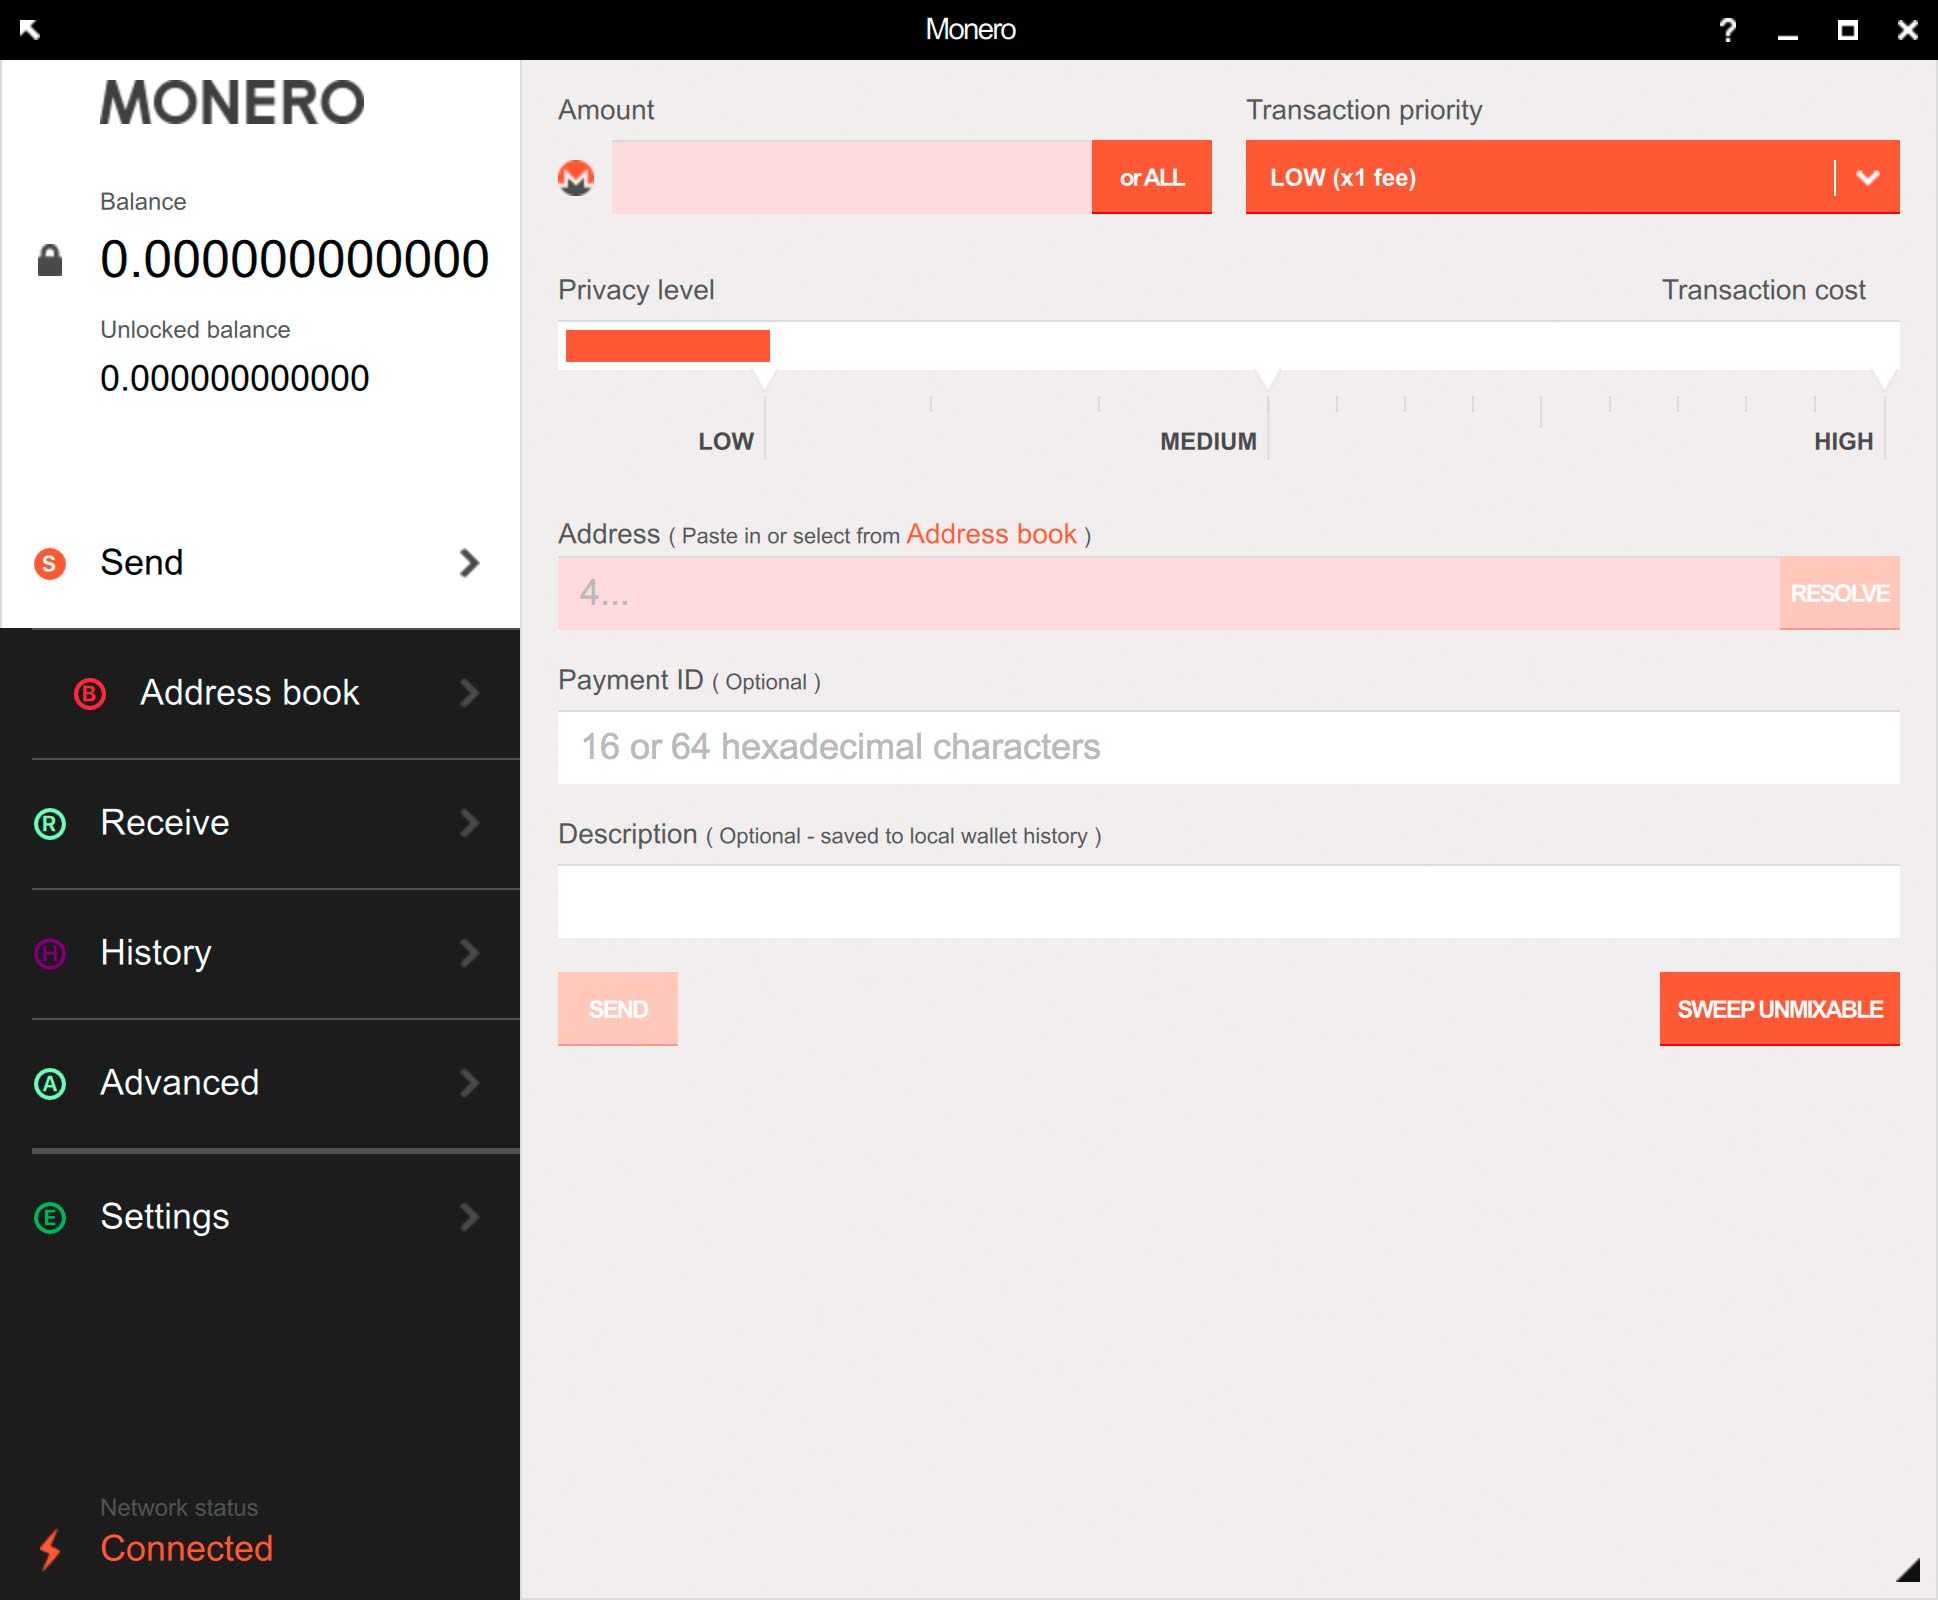 how to check transations to a specific monero wallet